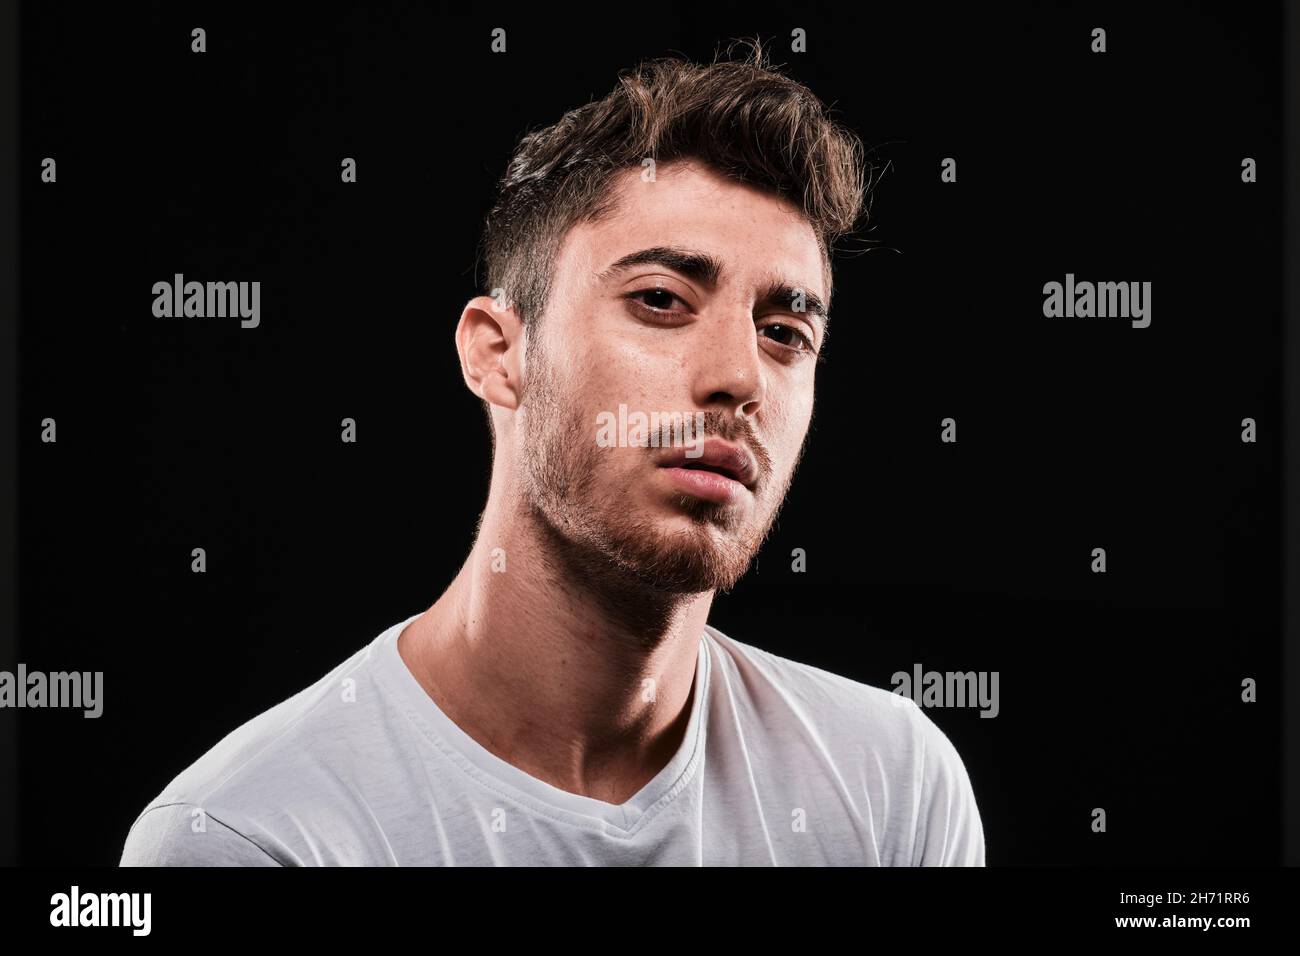 Young man close up portrait on a black background. He is wearing a basic white tshirt and looking at camera. Stock Photo